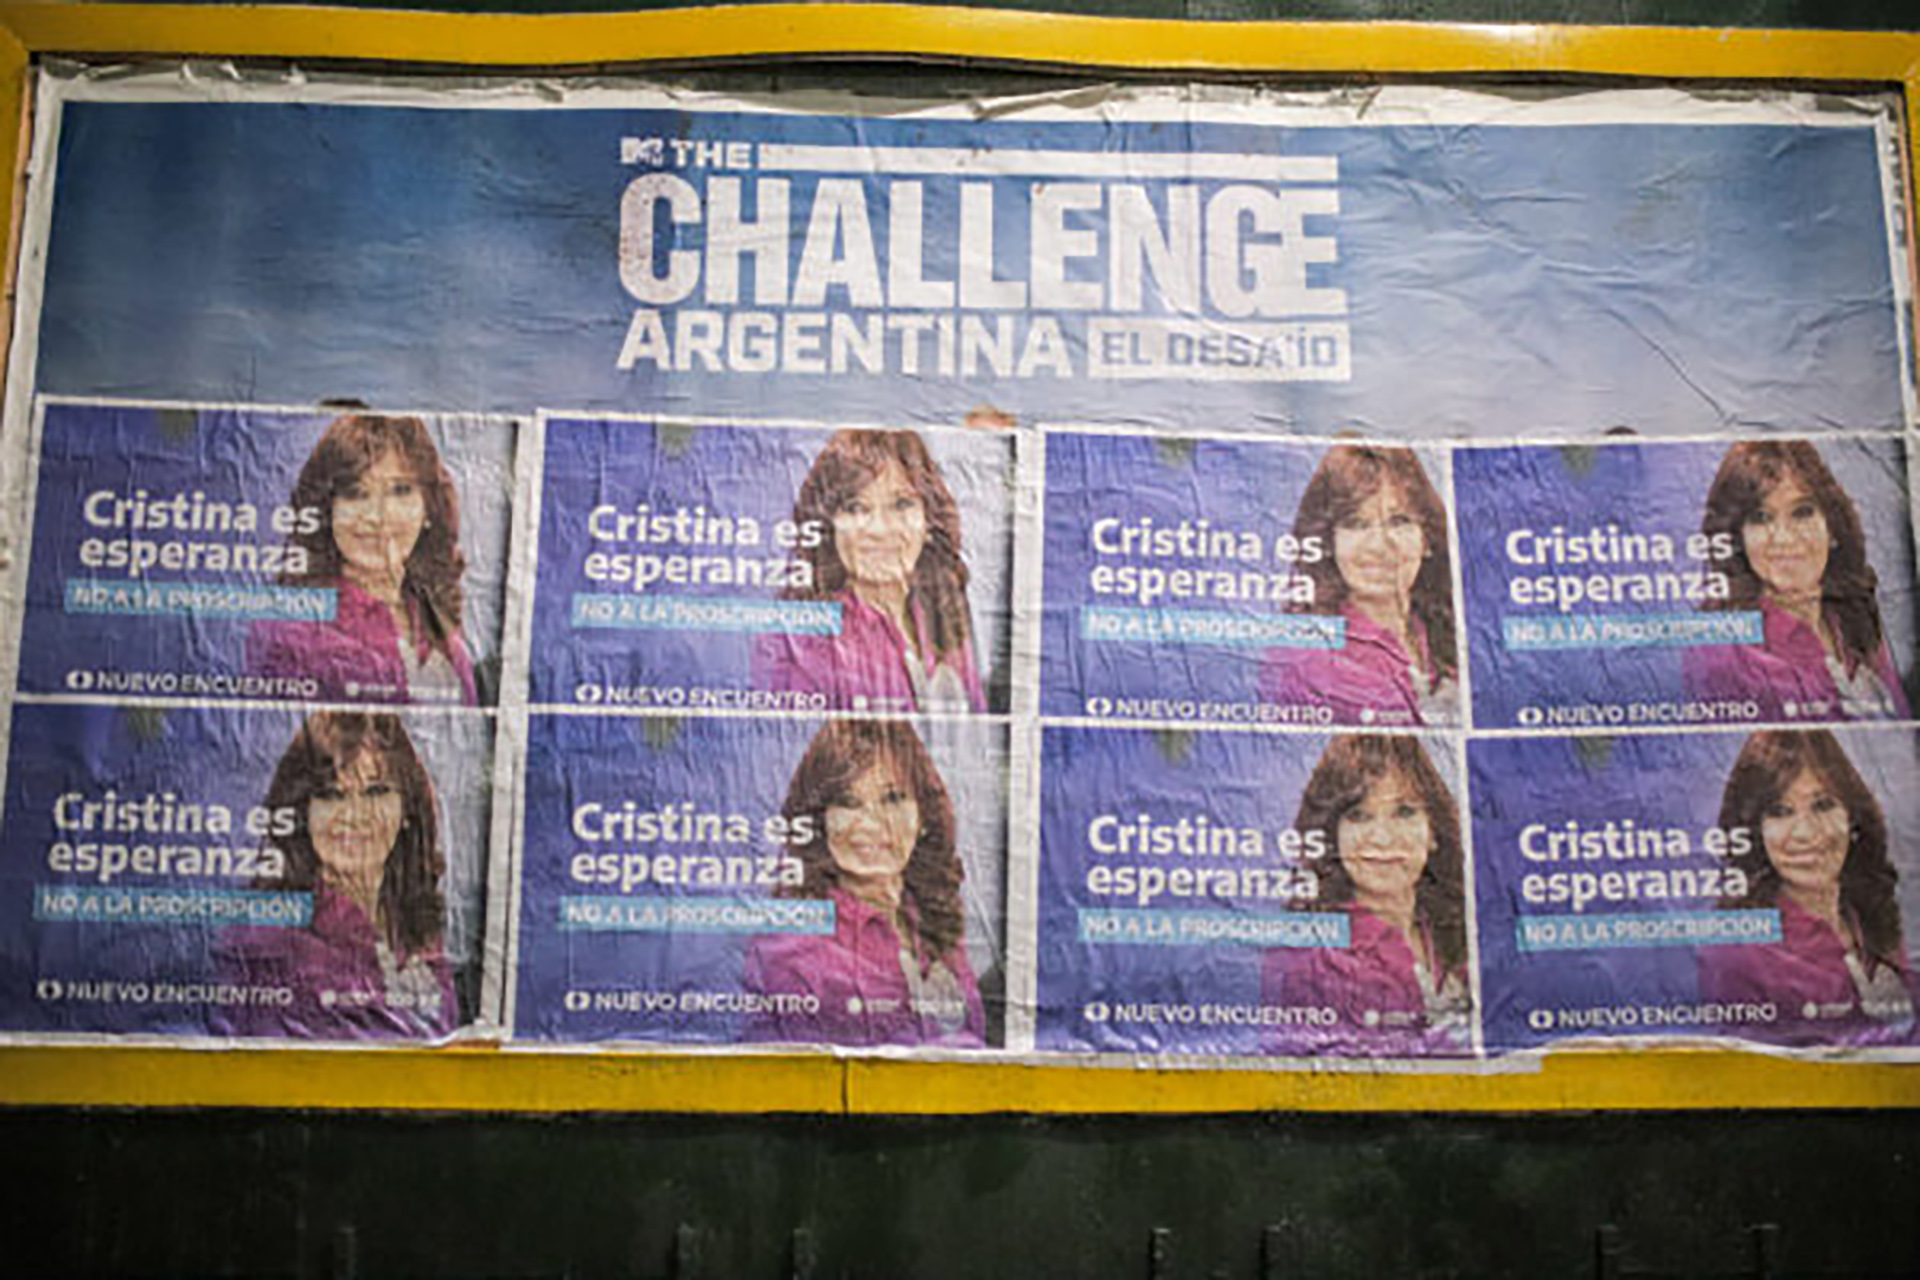 Kirchnerism installs in the streets, social networks and public debate the idea that Cristina Kirchner is a candidate (Source)